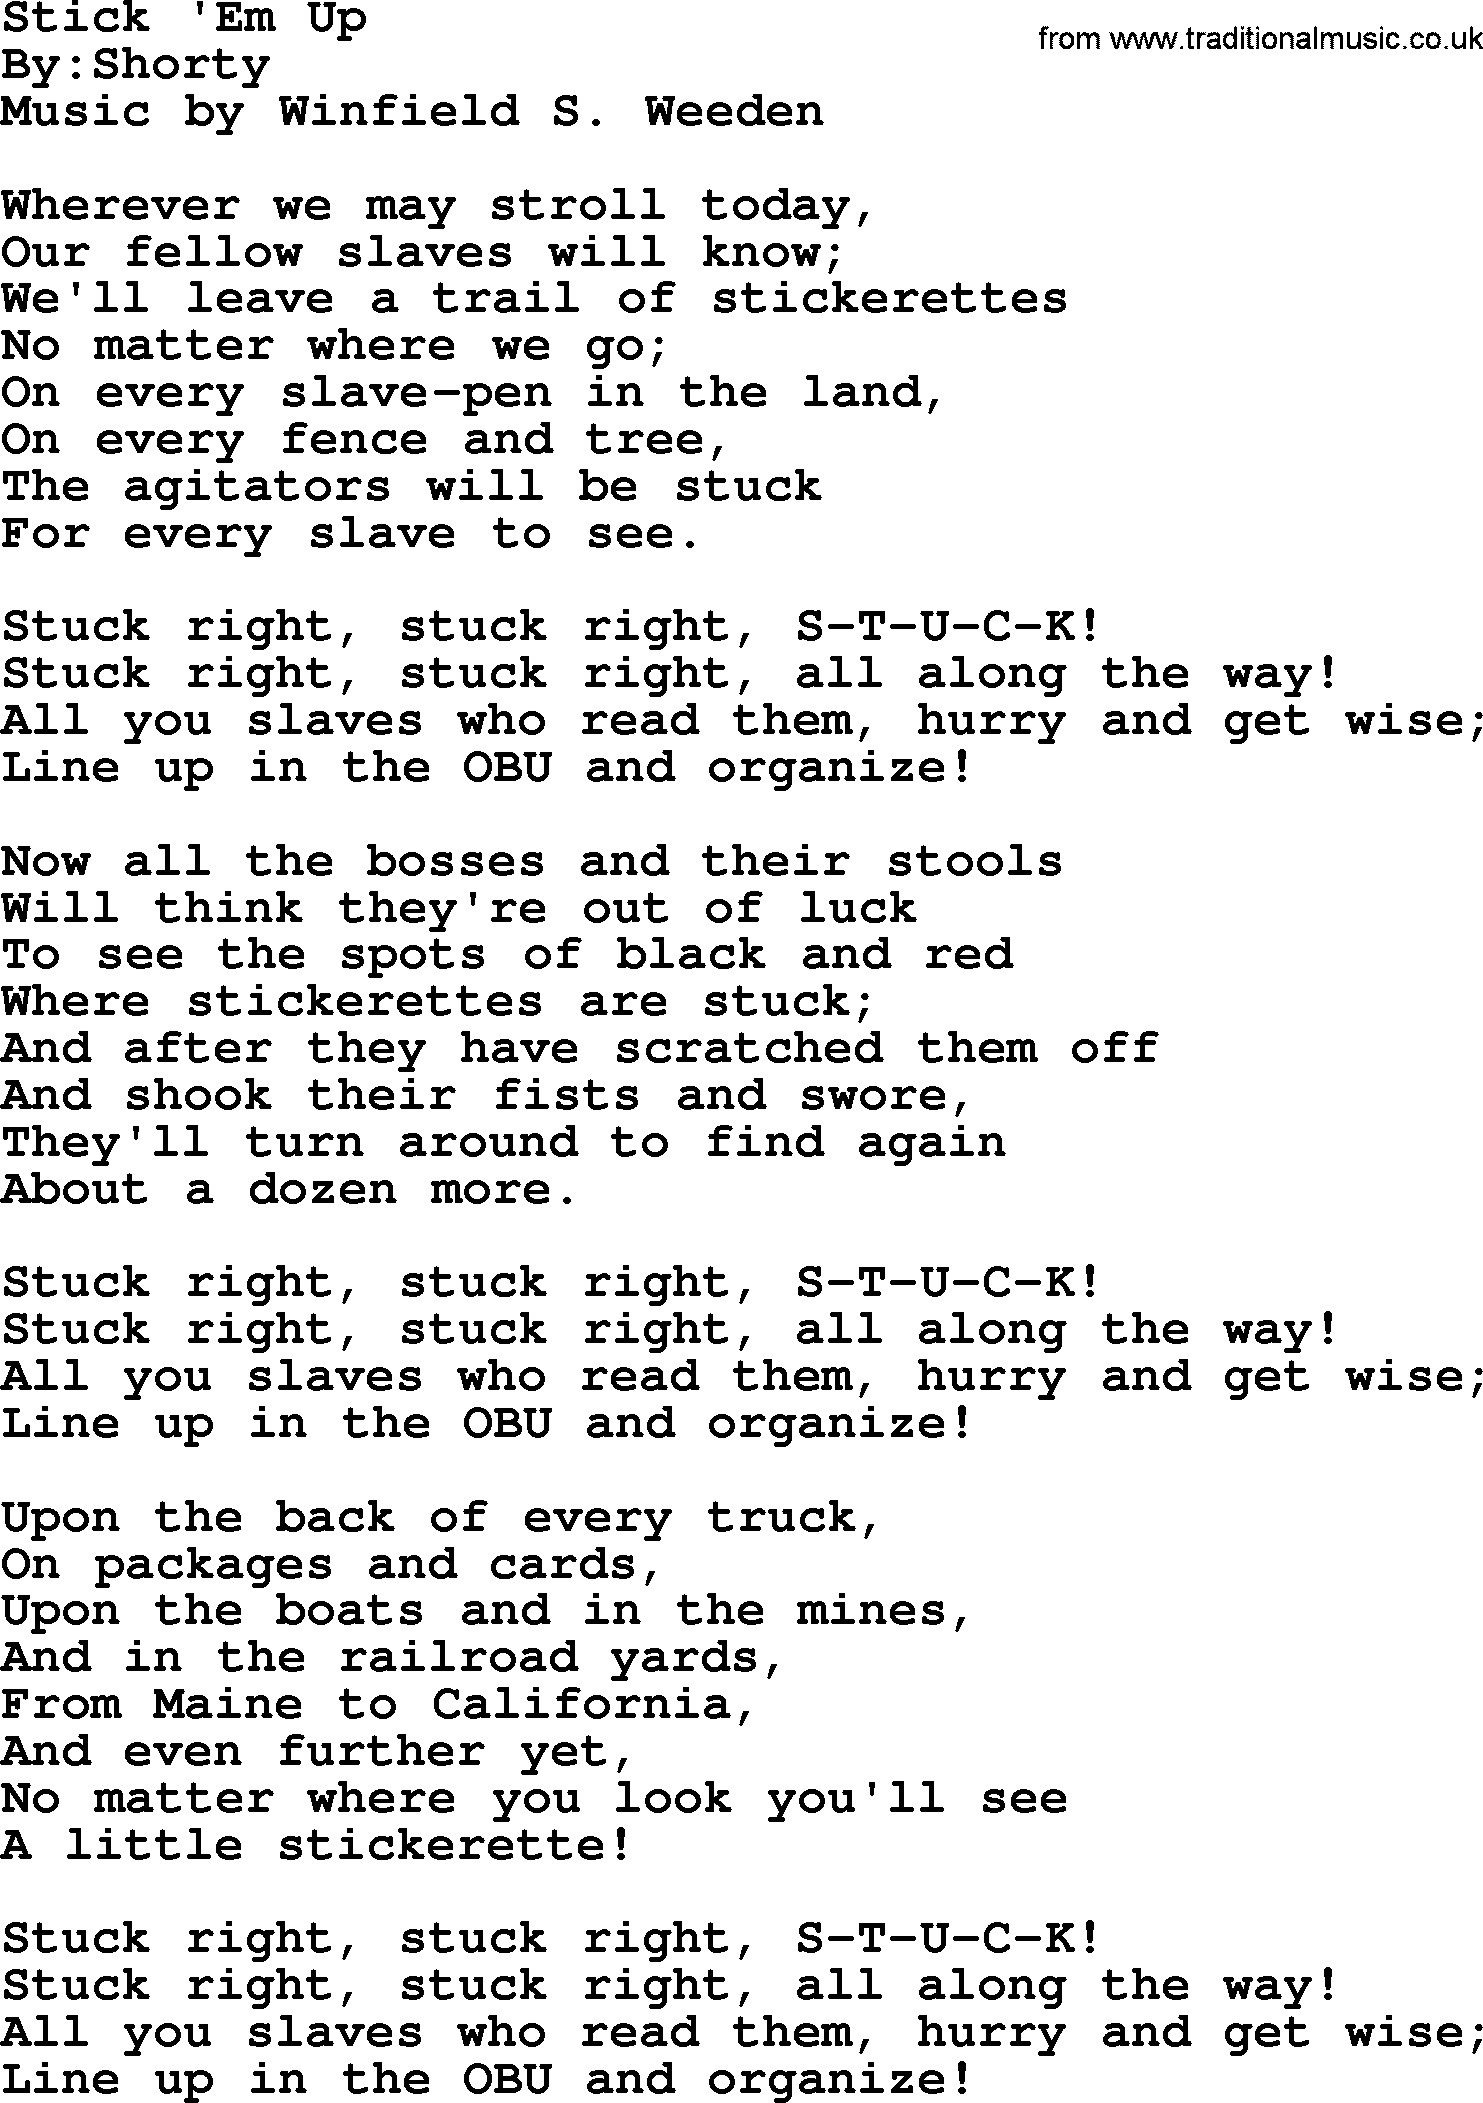 Political, Solidarity, Workers or Union song: Stick Em Up, lyrics